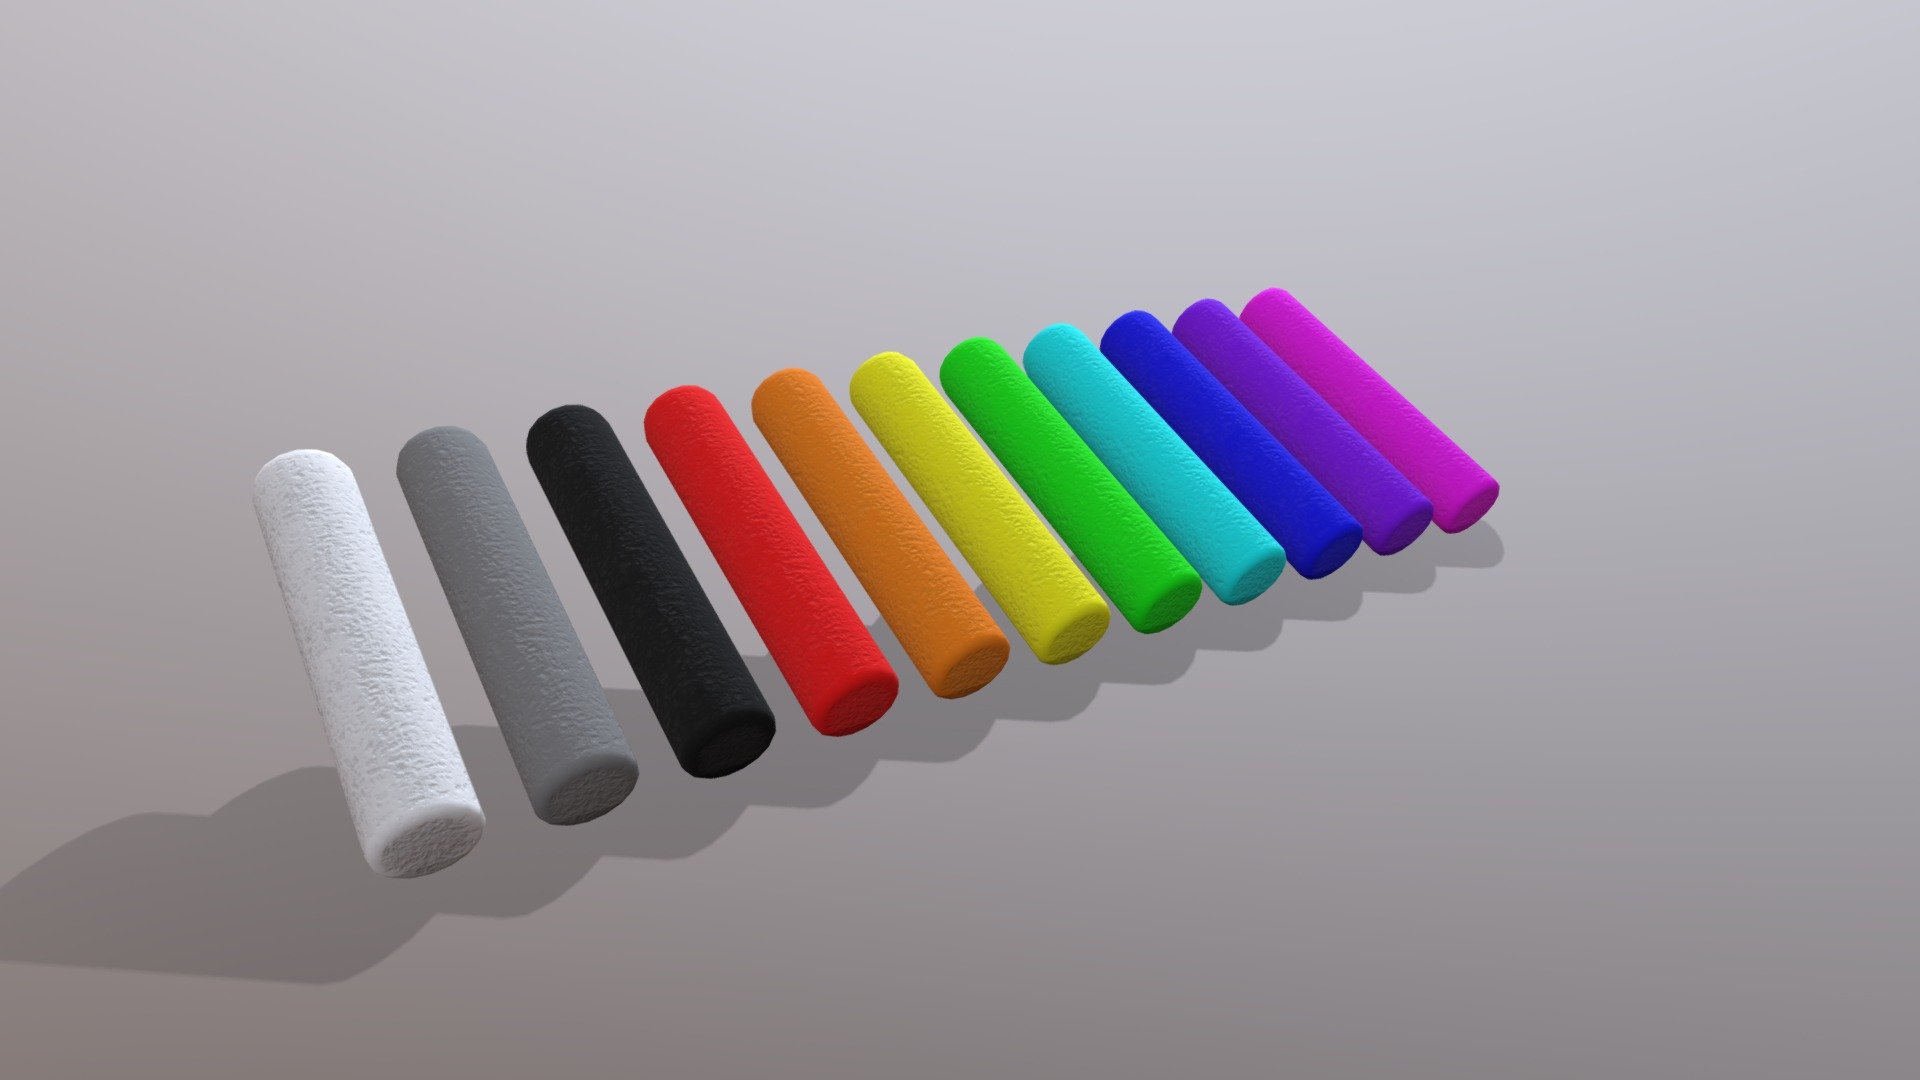 A simple chalk pack consisting of 11 different colors.

Contains the model and textures 3d model